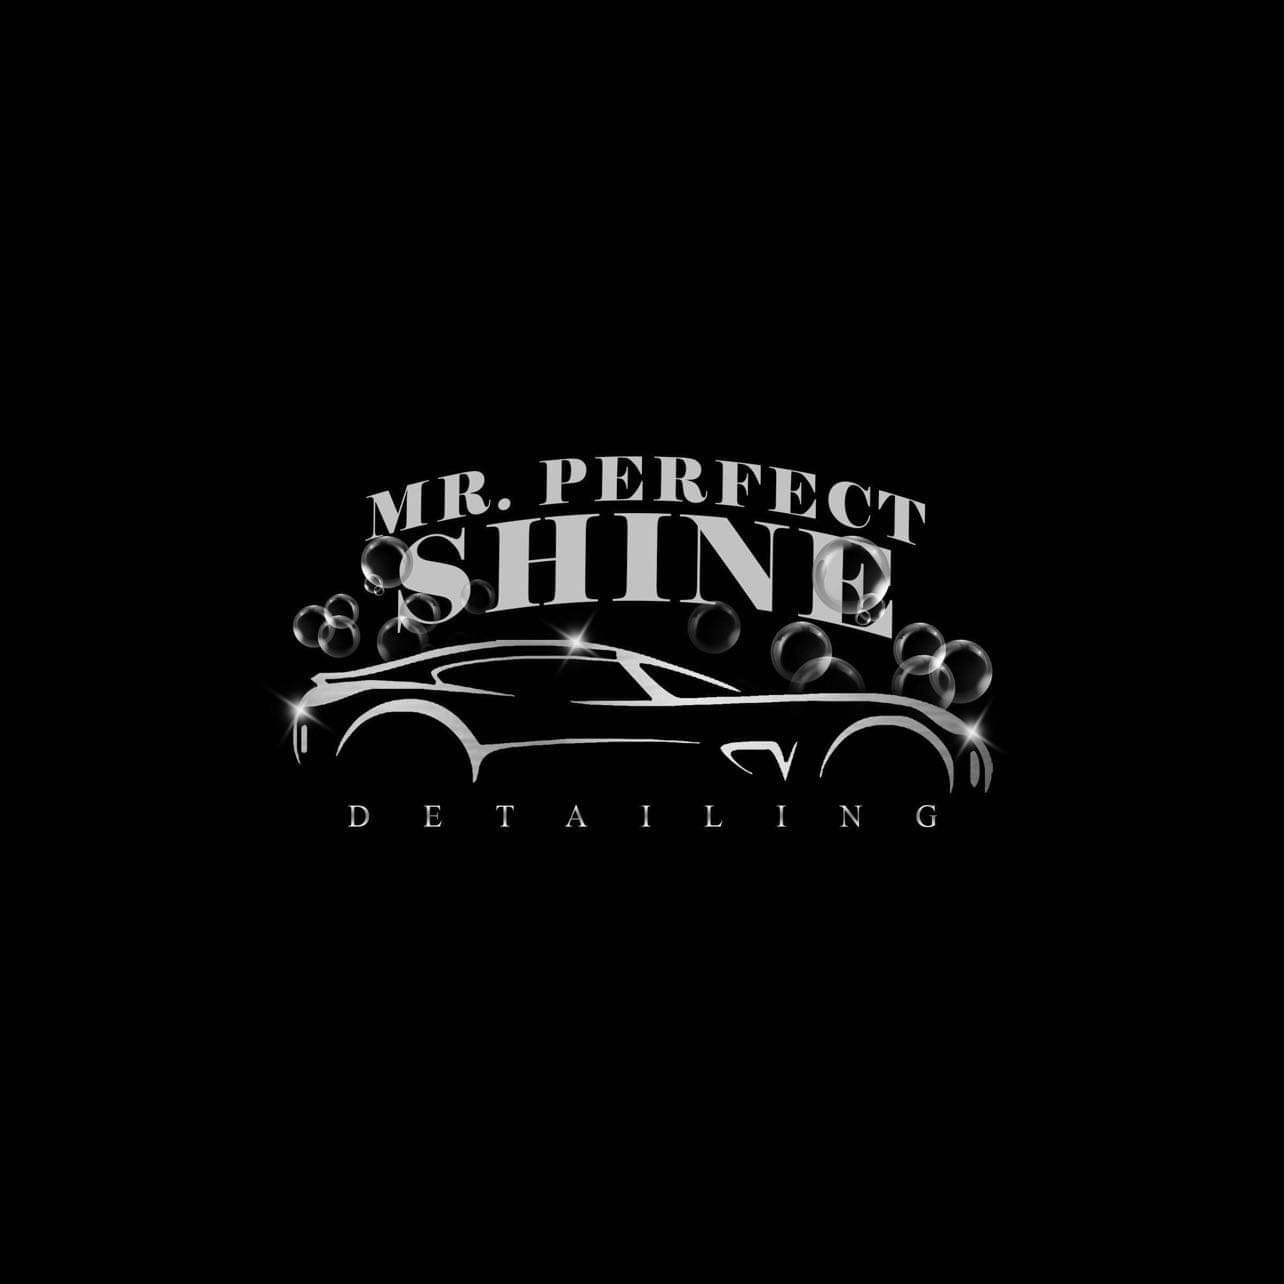 MR perfect gaming - YouTube